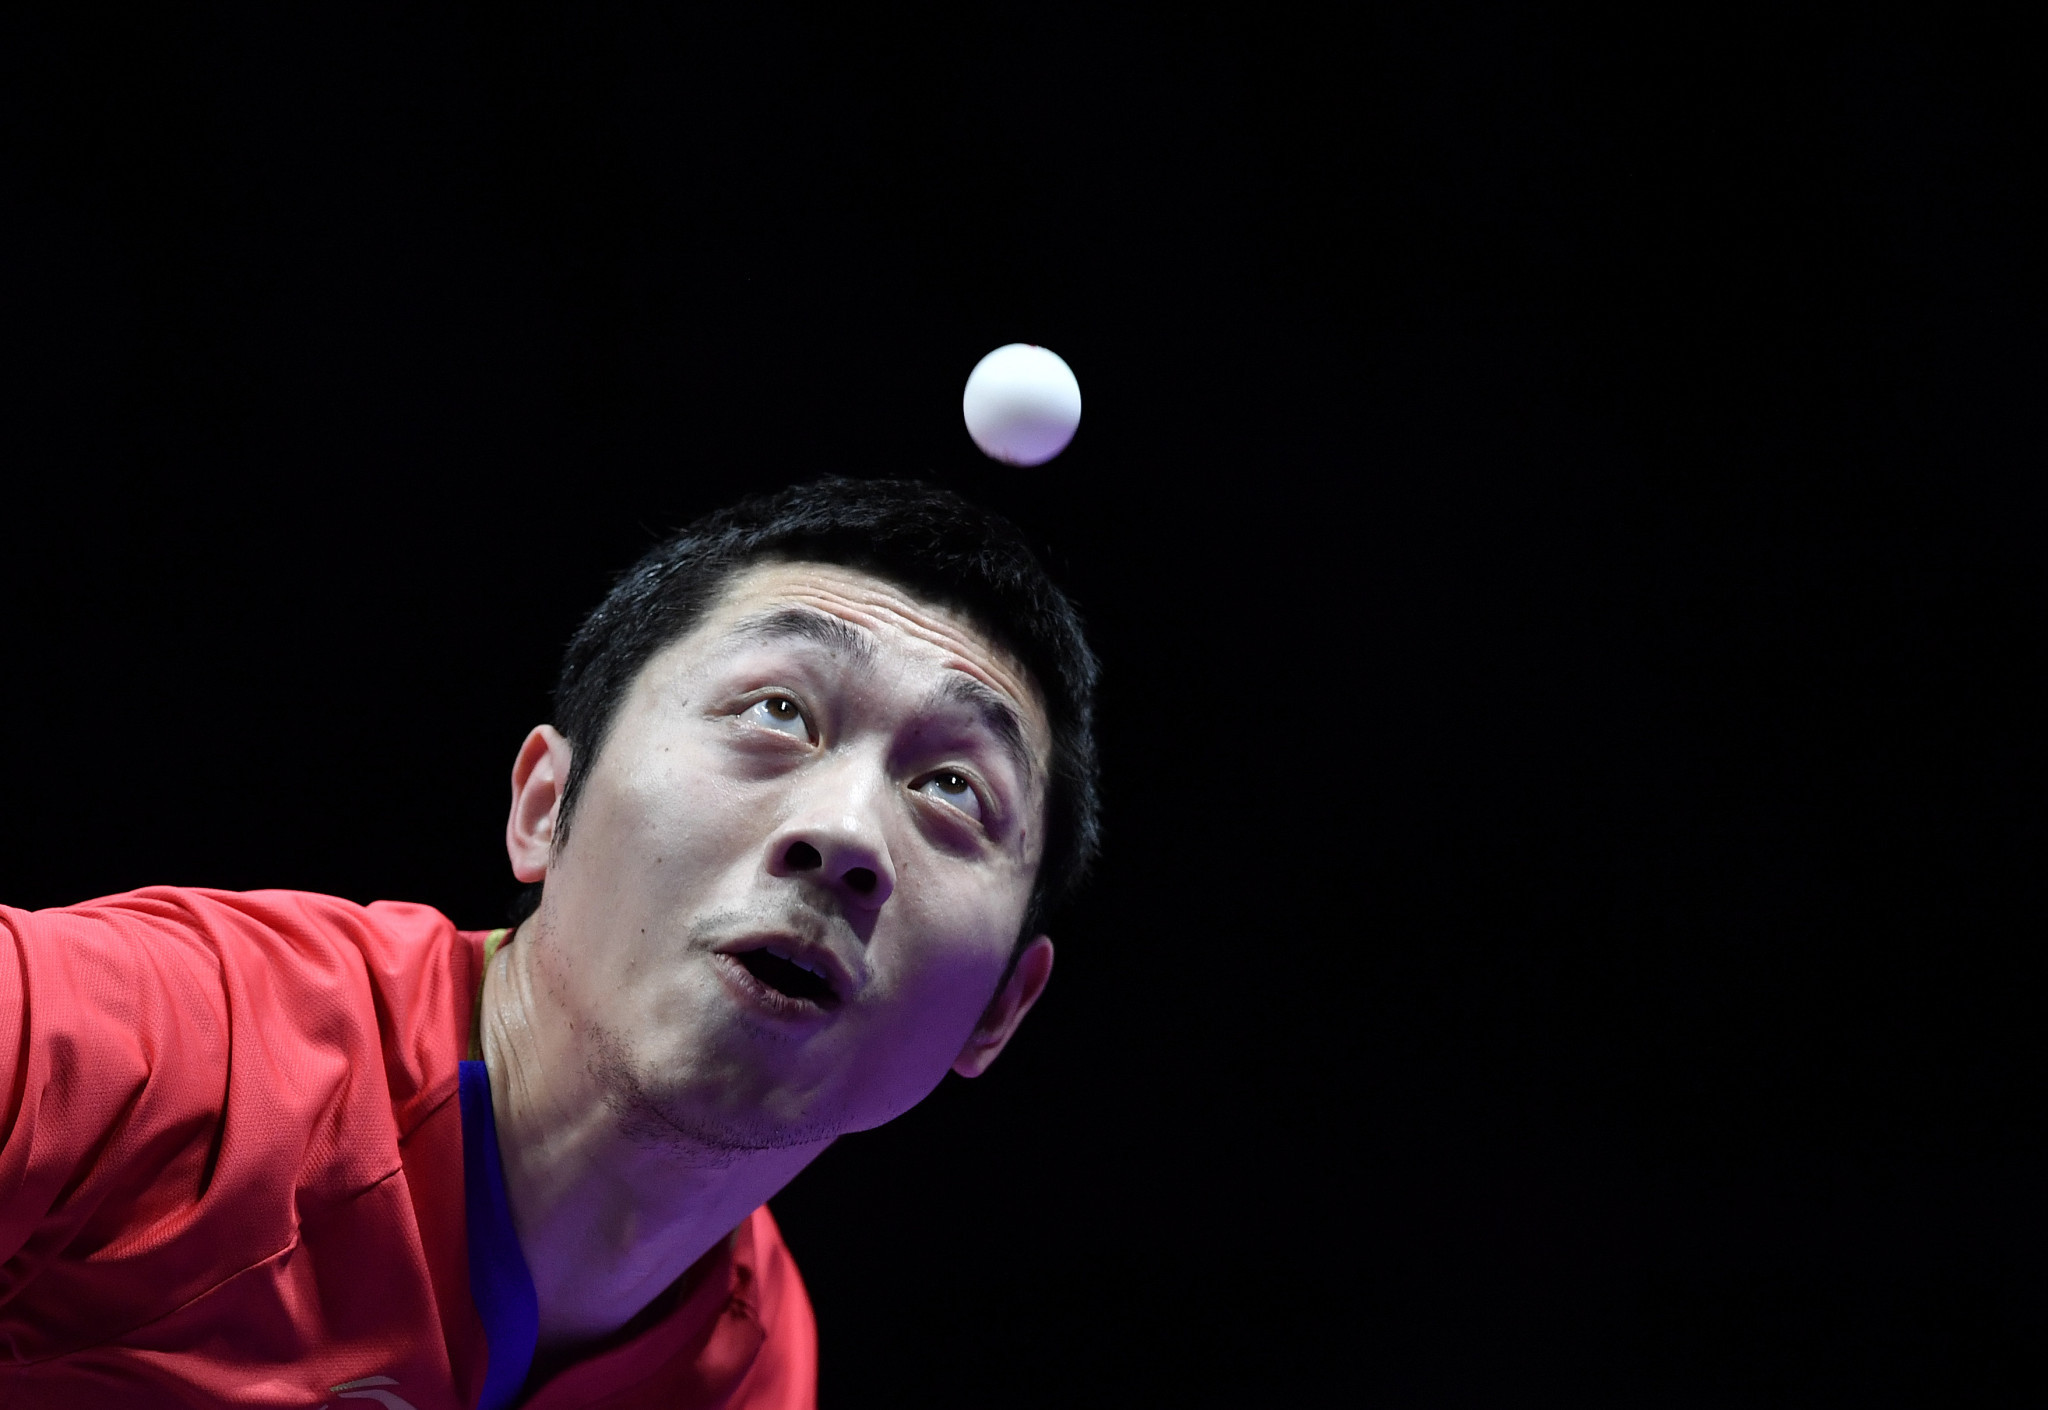 Xu Xin won his third World Tour event in a row ©Getty Images